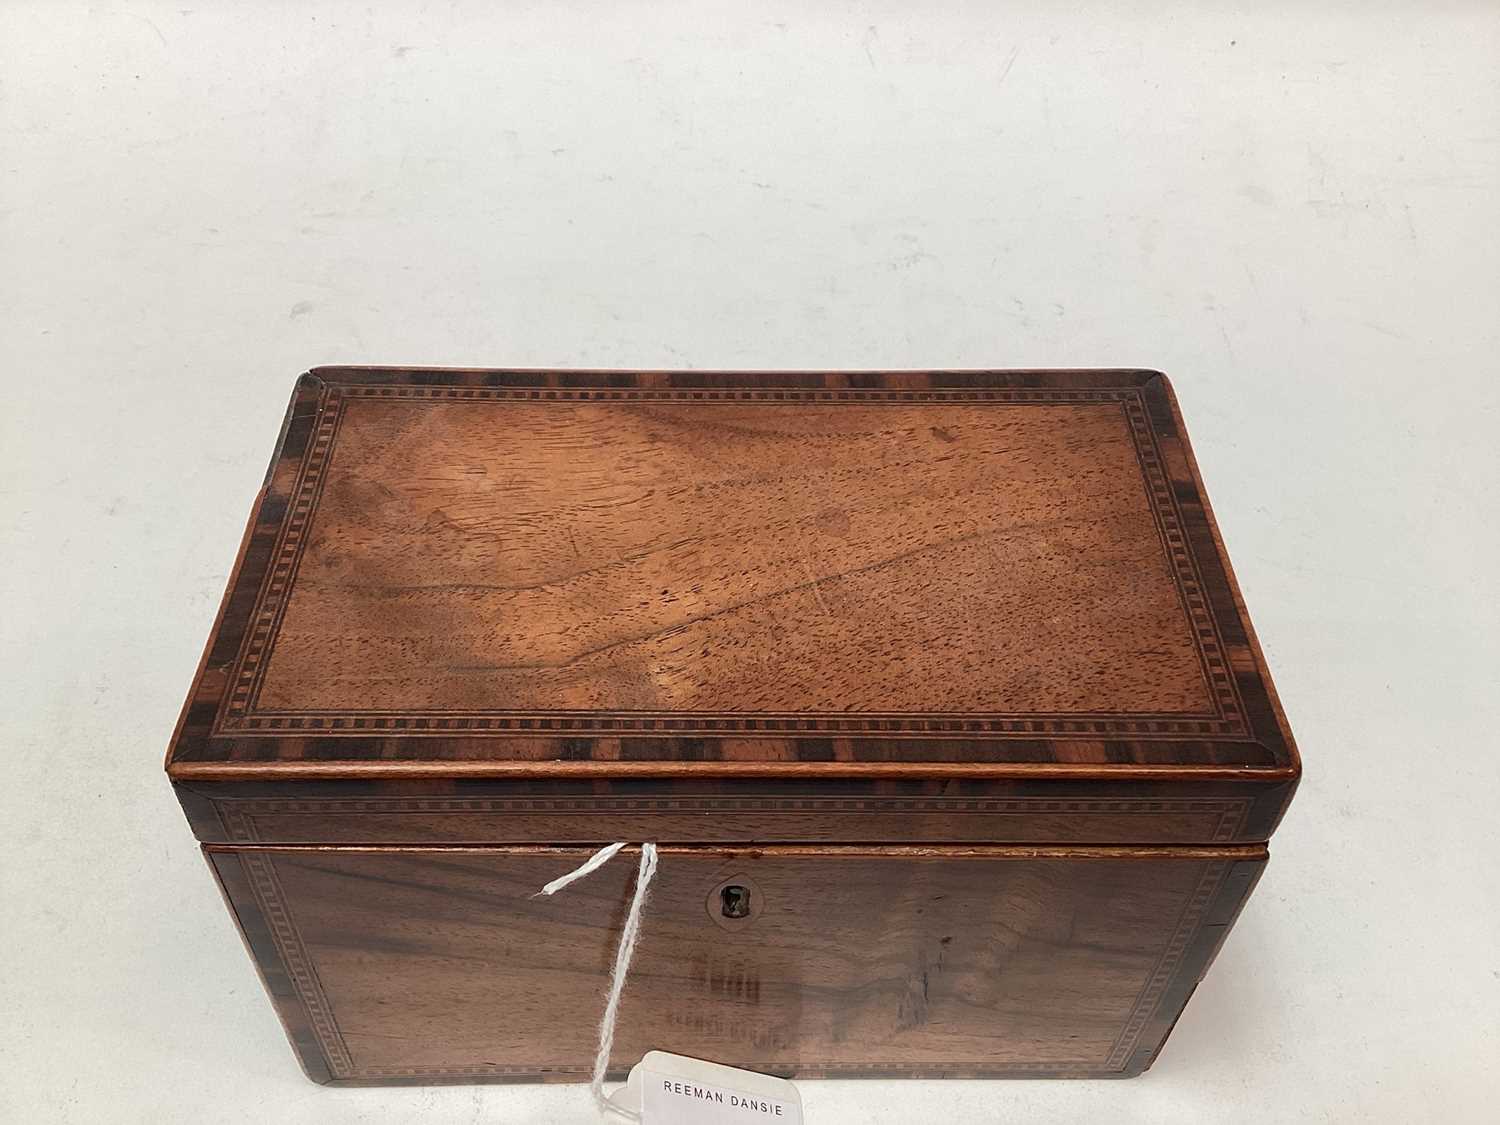 Victorian walnut tea caddy with banded decoration to edges, two-division interior, 18cm wide - Image 5 of 8